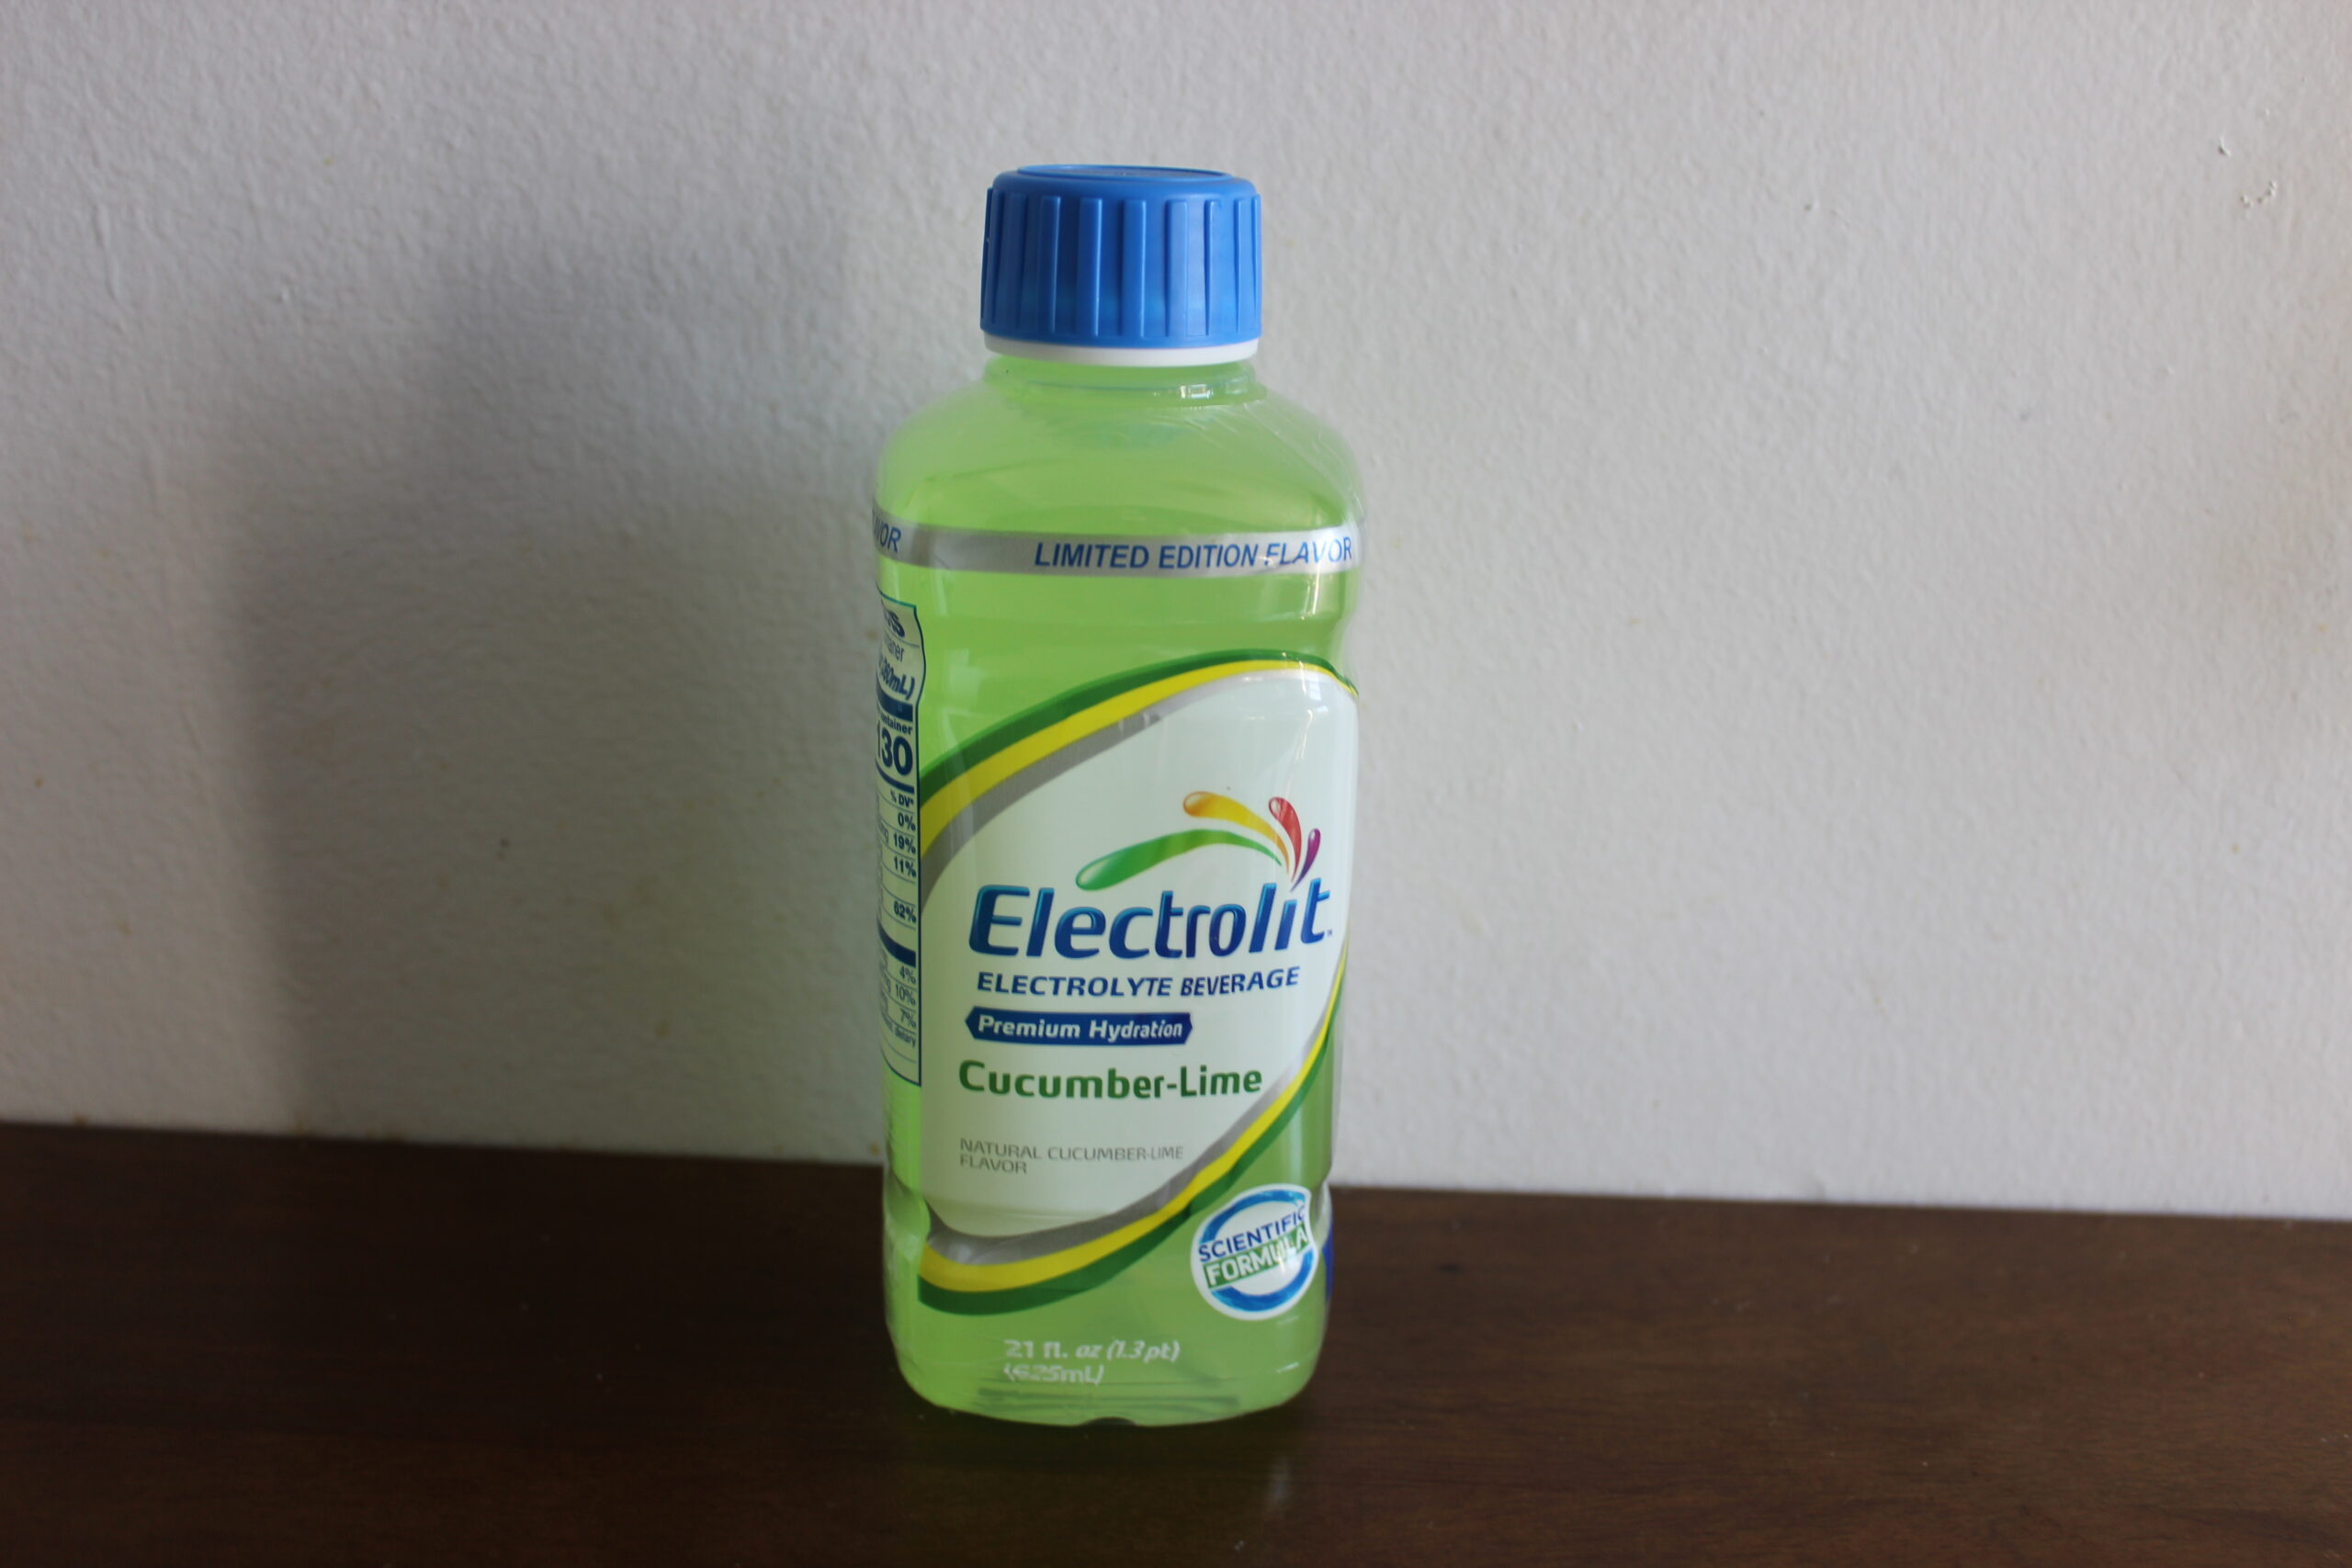 Hydrate Yourself with Electrolit!